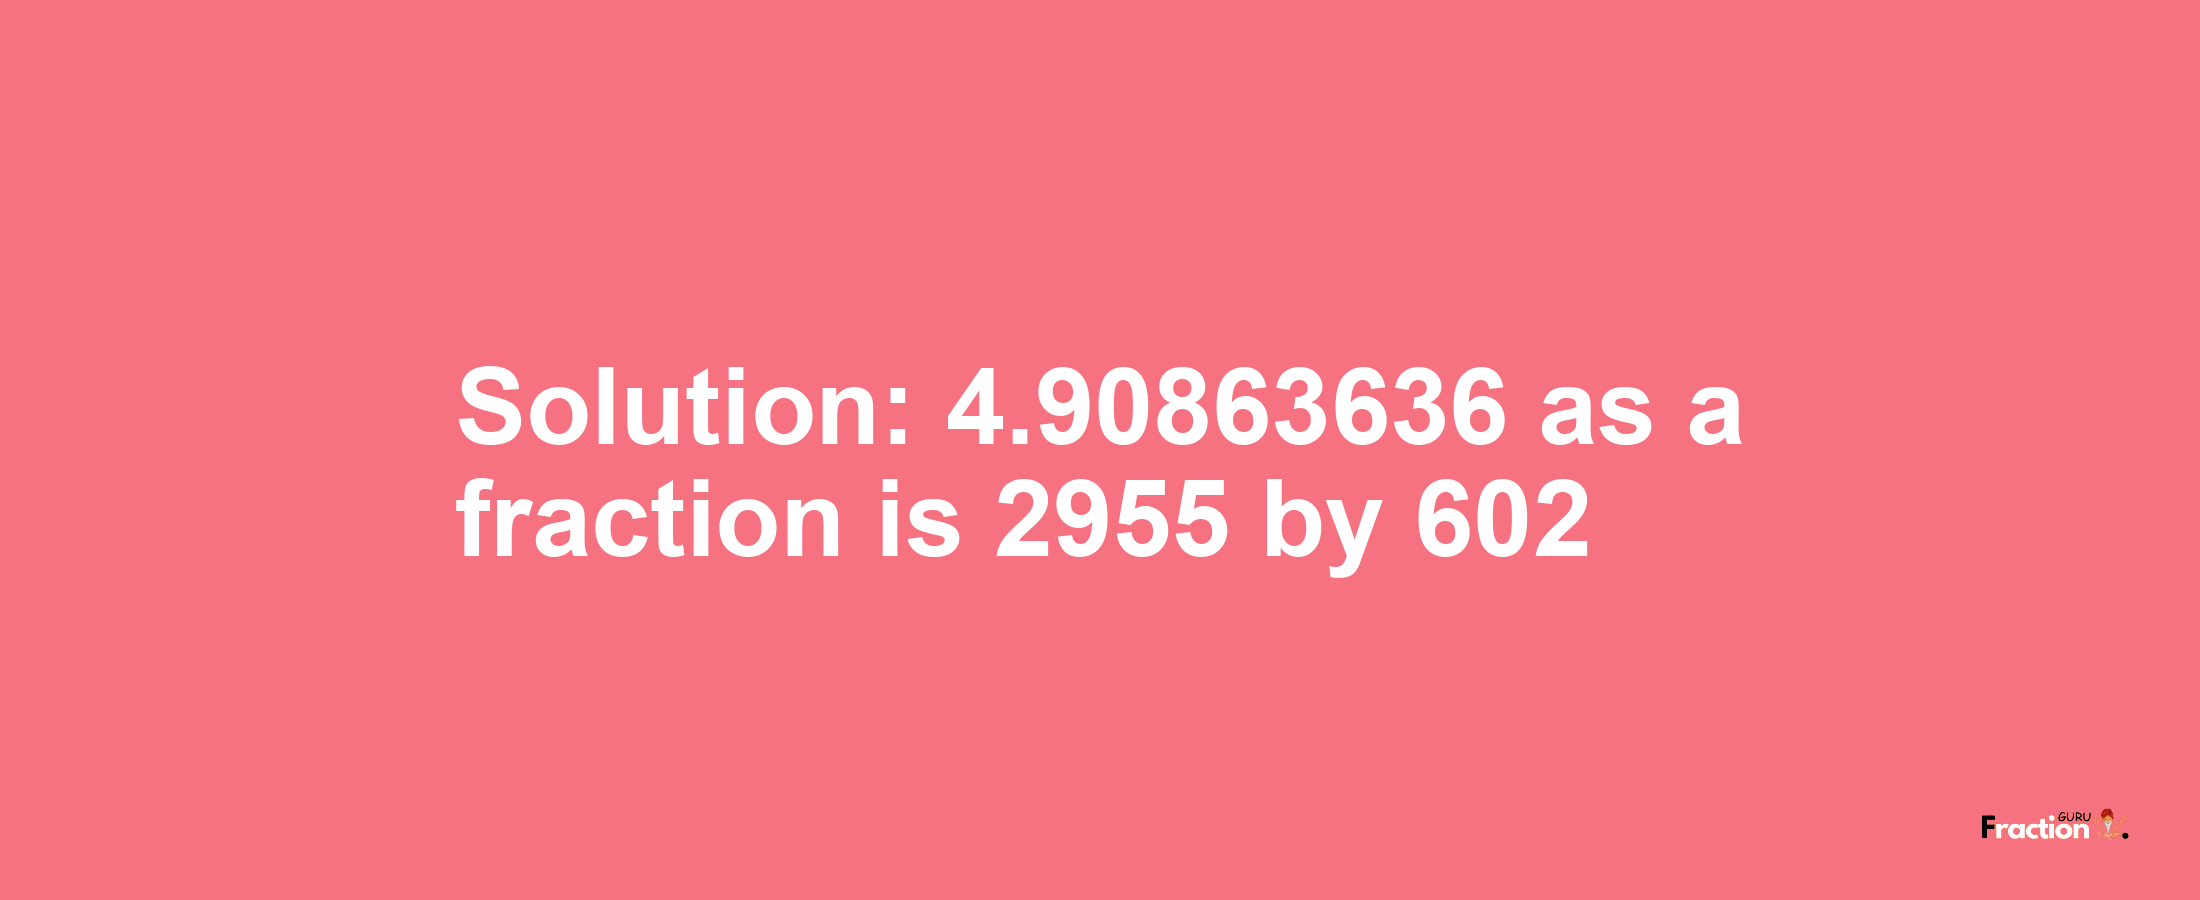 Solution:4.90863636 as a fraction is 2955/602